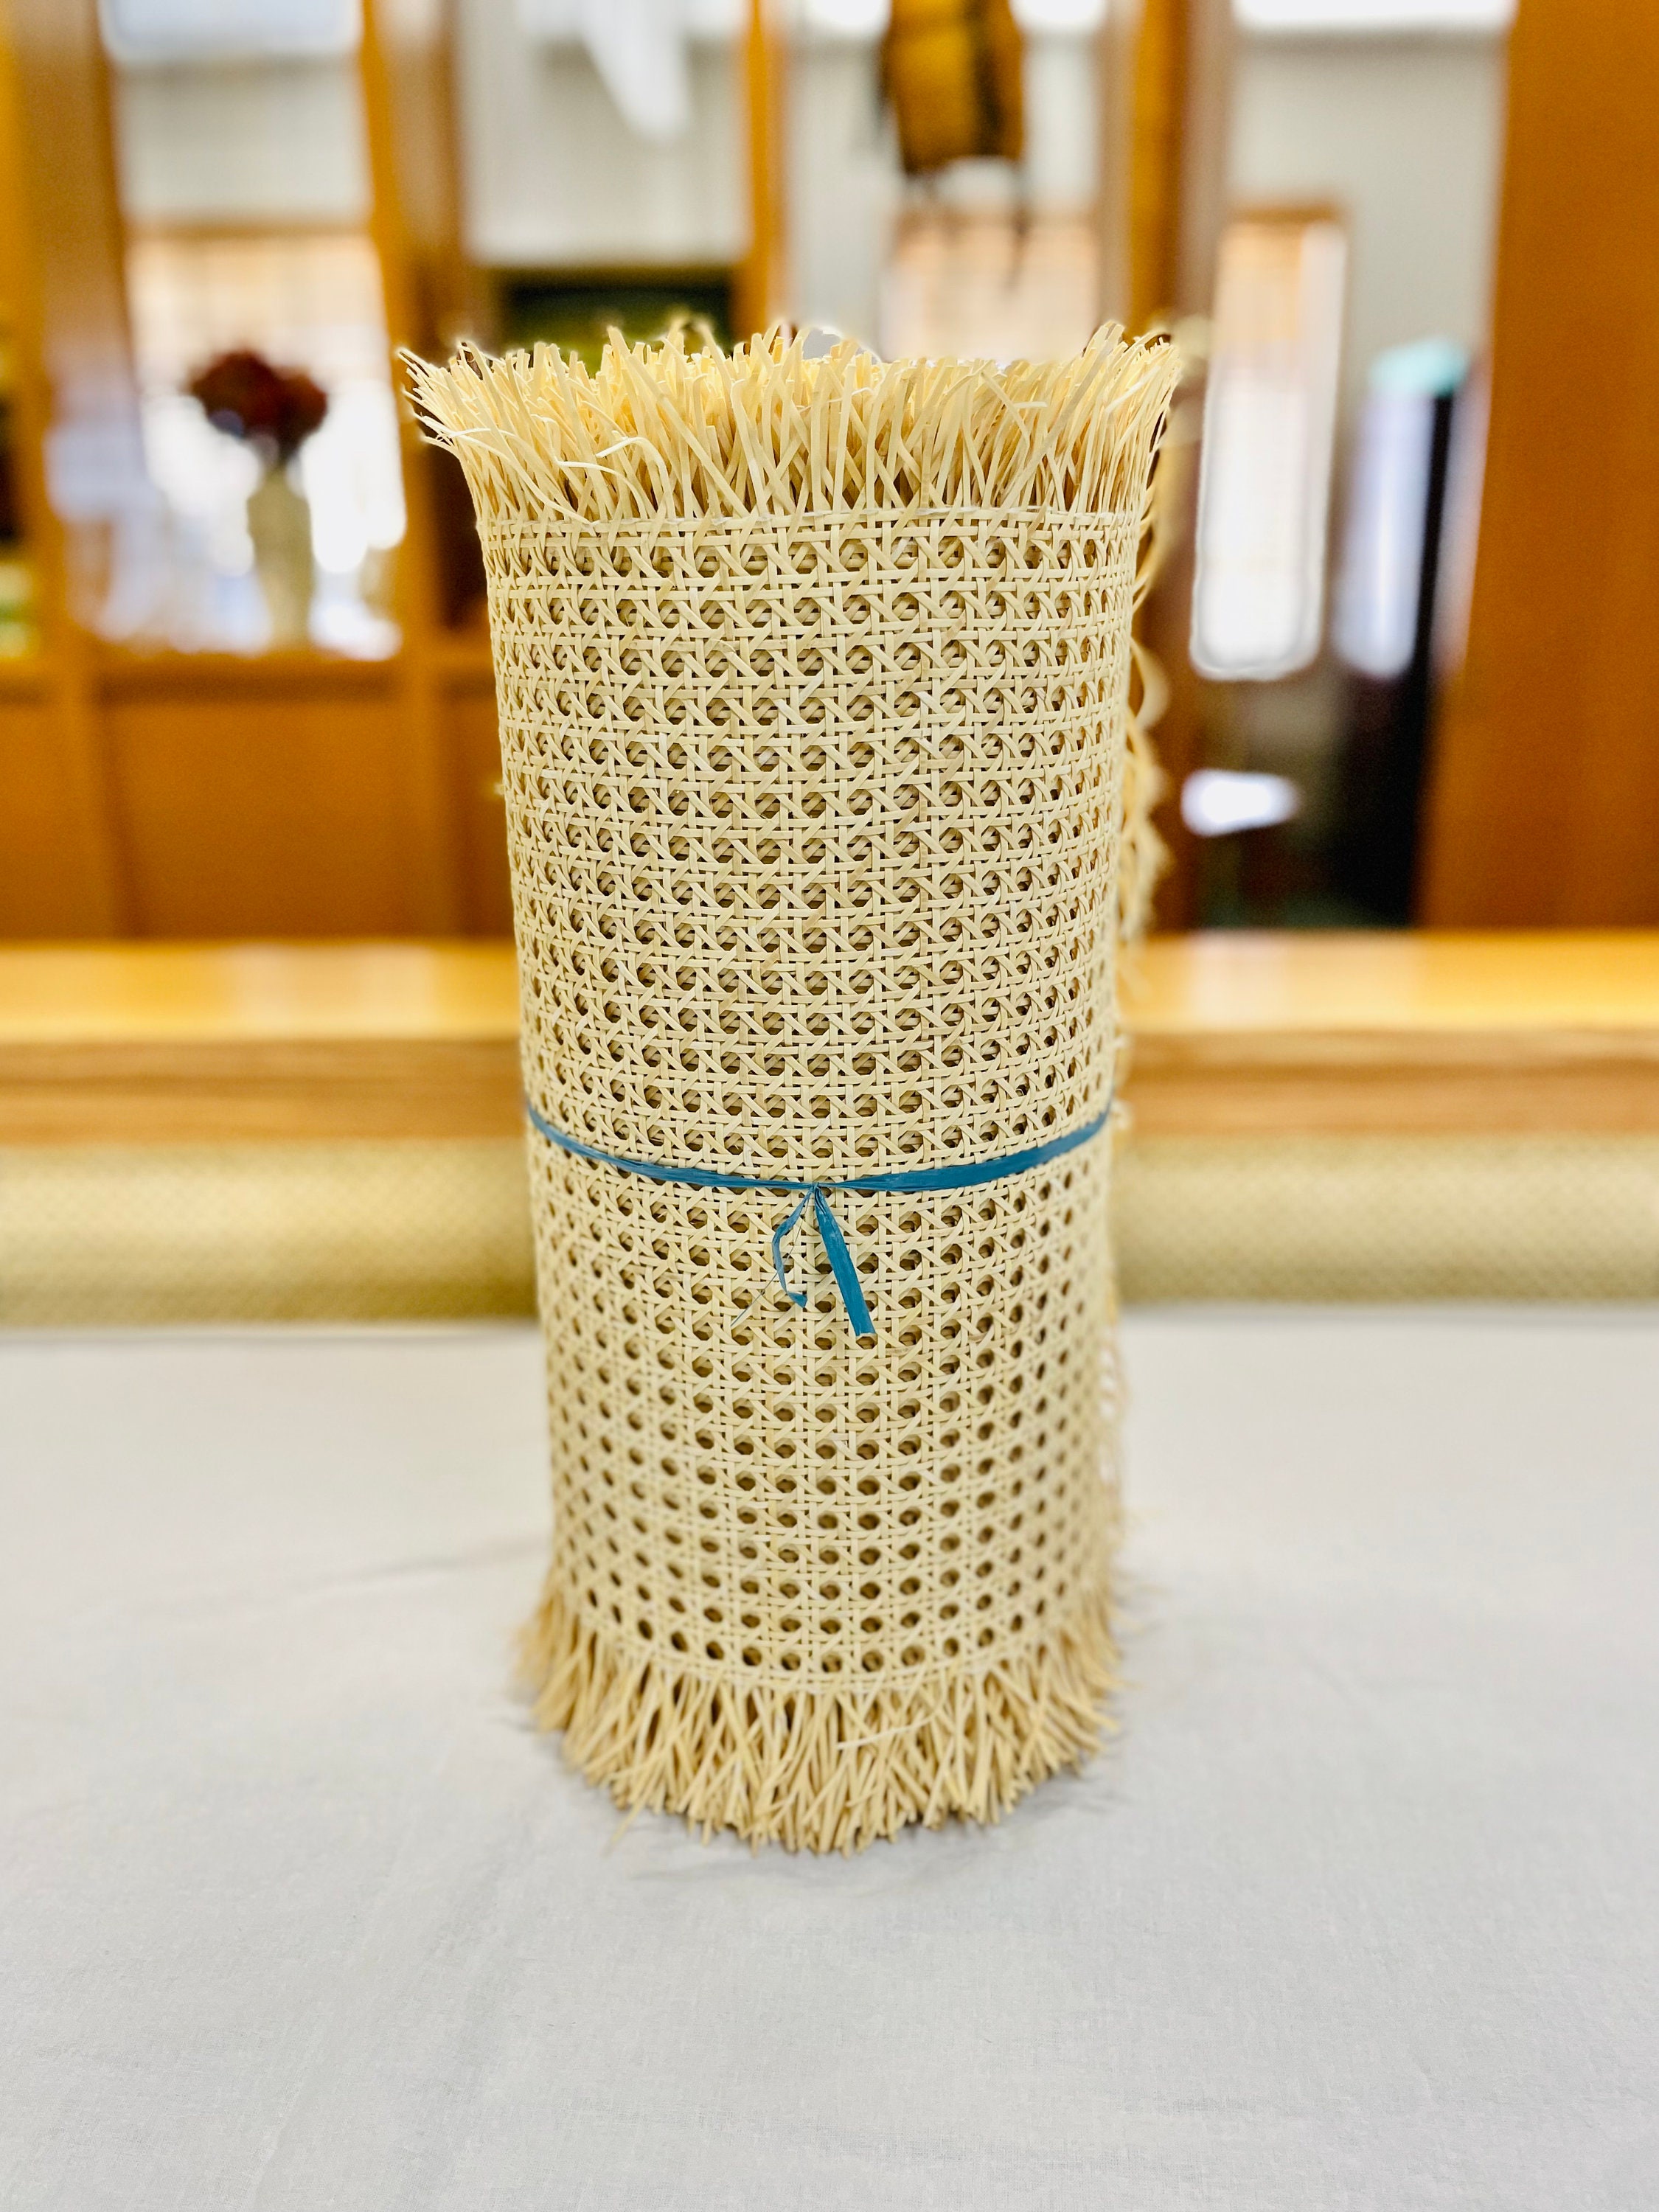 White AHANDMAKER Basket Weaving Cane 4mm Wicker Material Rattan Cane Webbing for Chair Making and Wicker Weaving DIY Furniture Making Supplies 